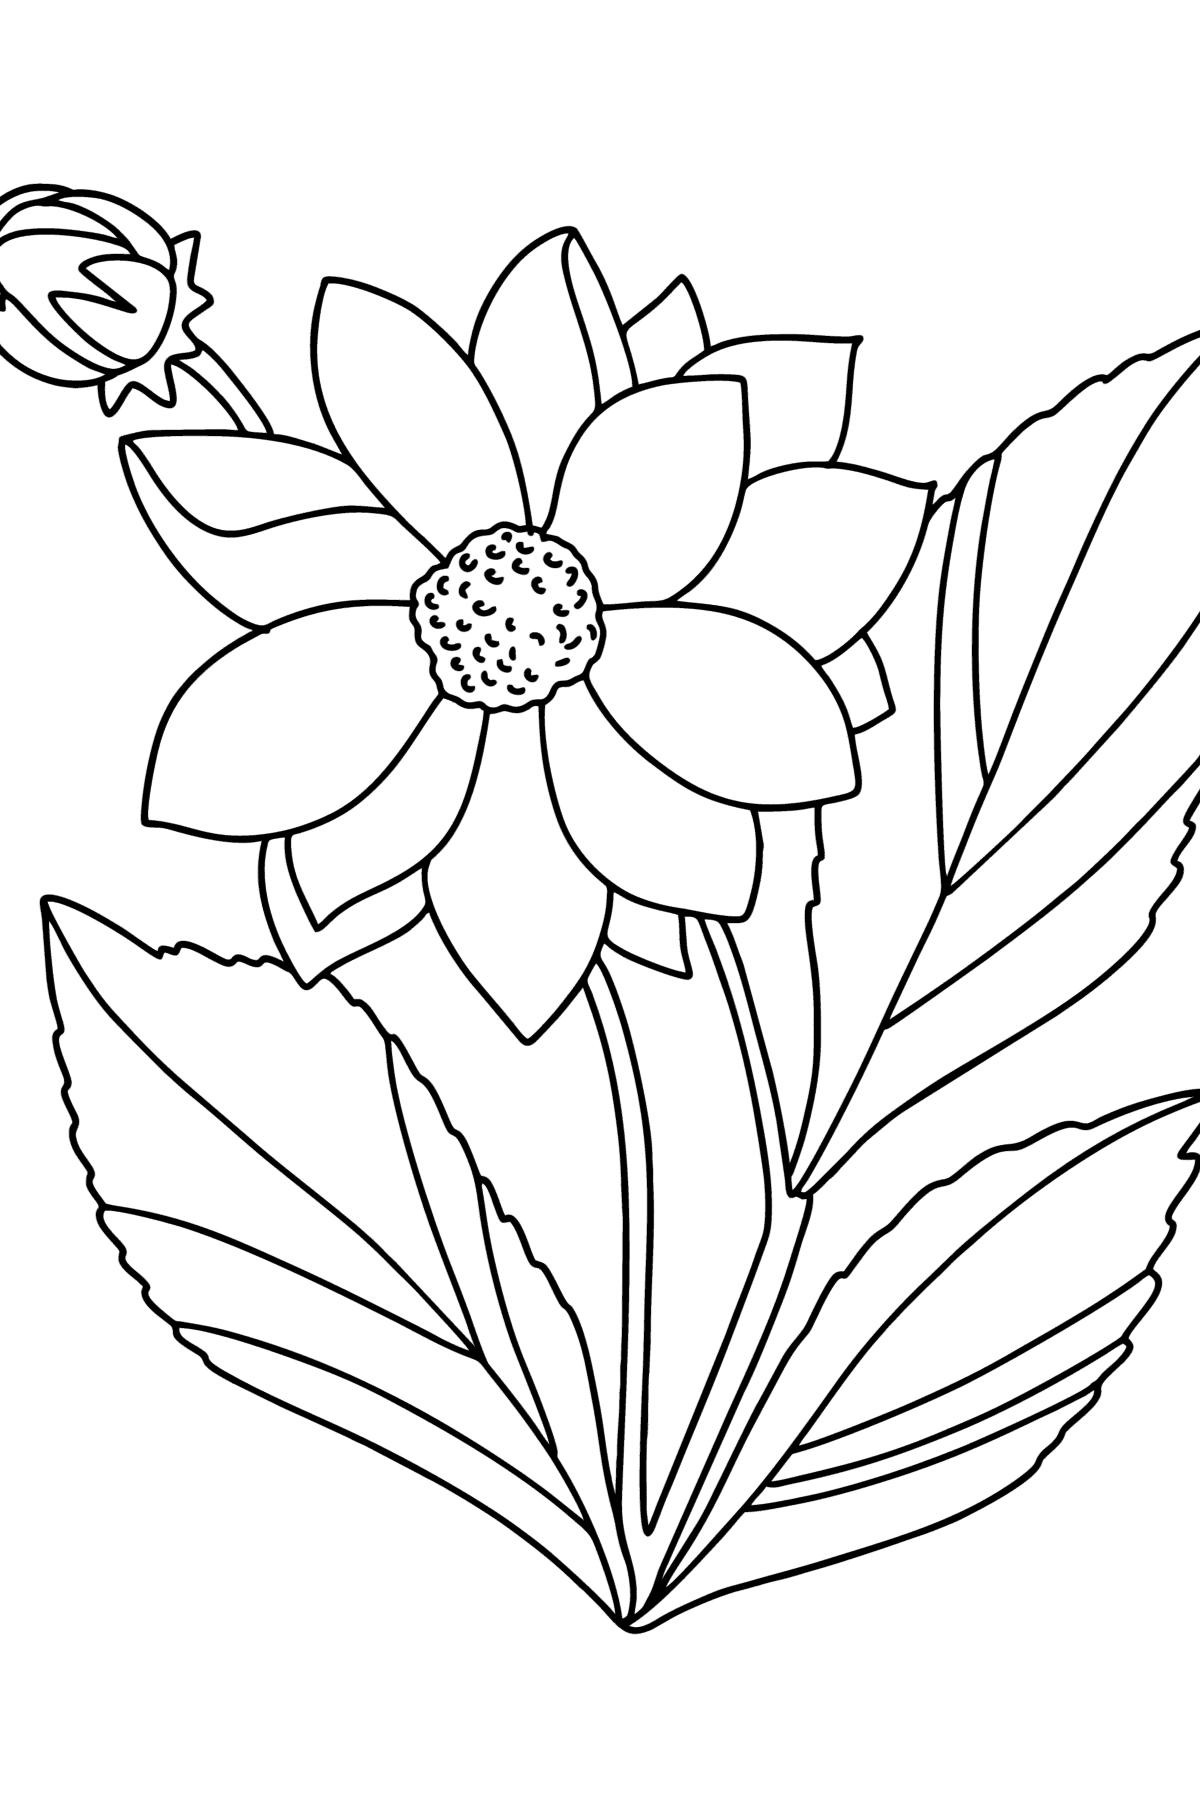 Dahlias coloring page for Kids   Online and Print for Free